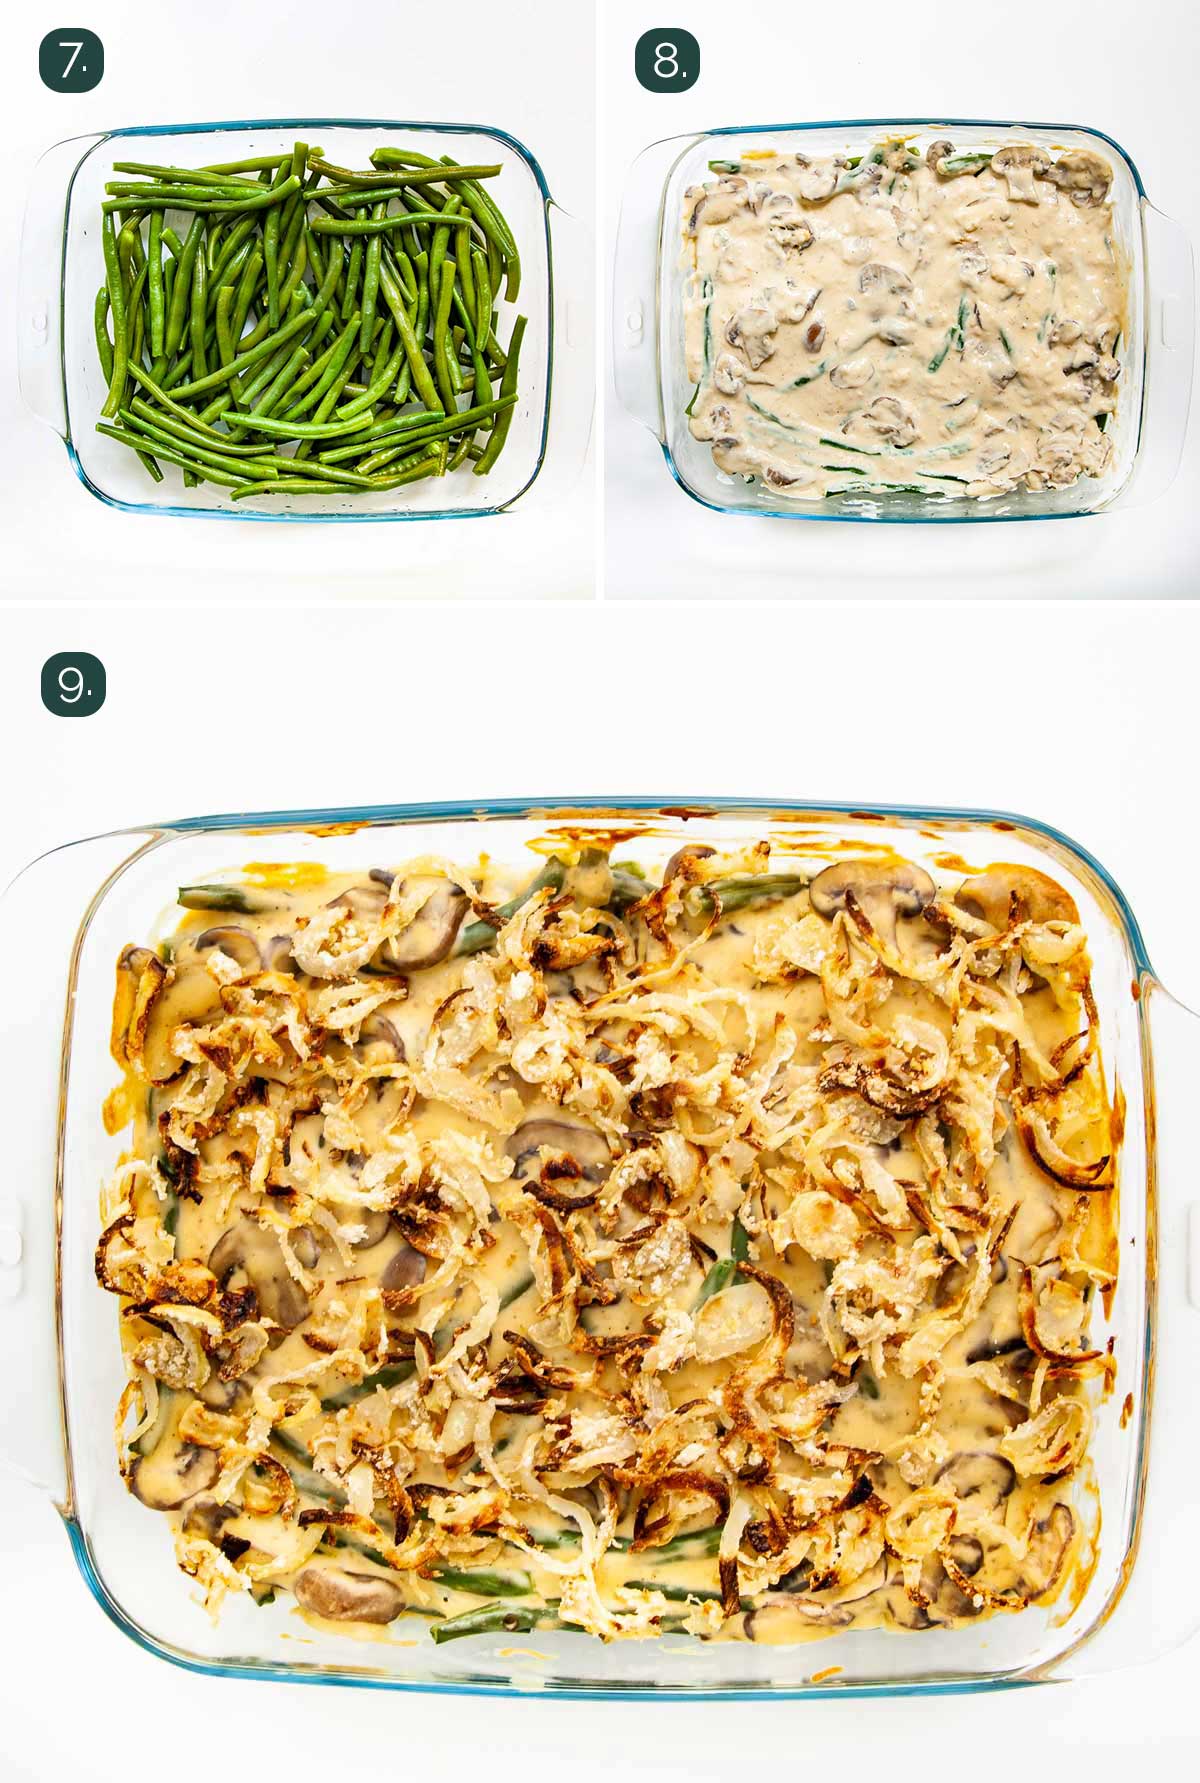 detailed process shots showing how to finish making green bean casserole.